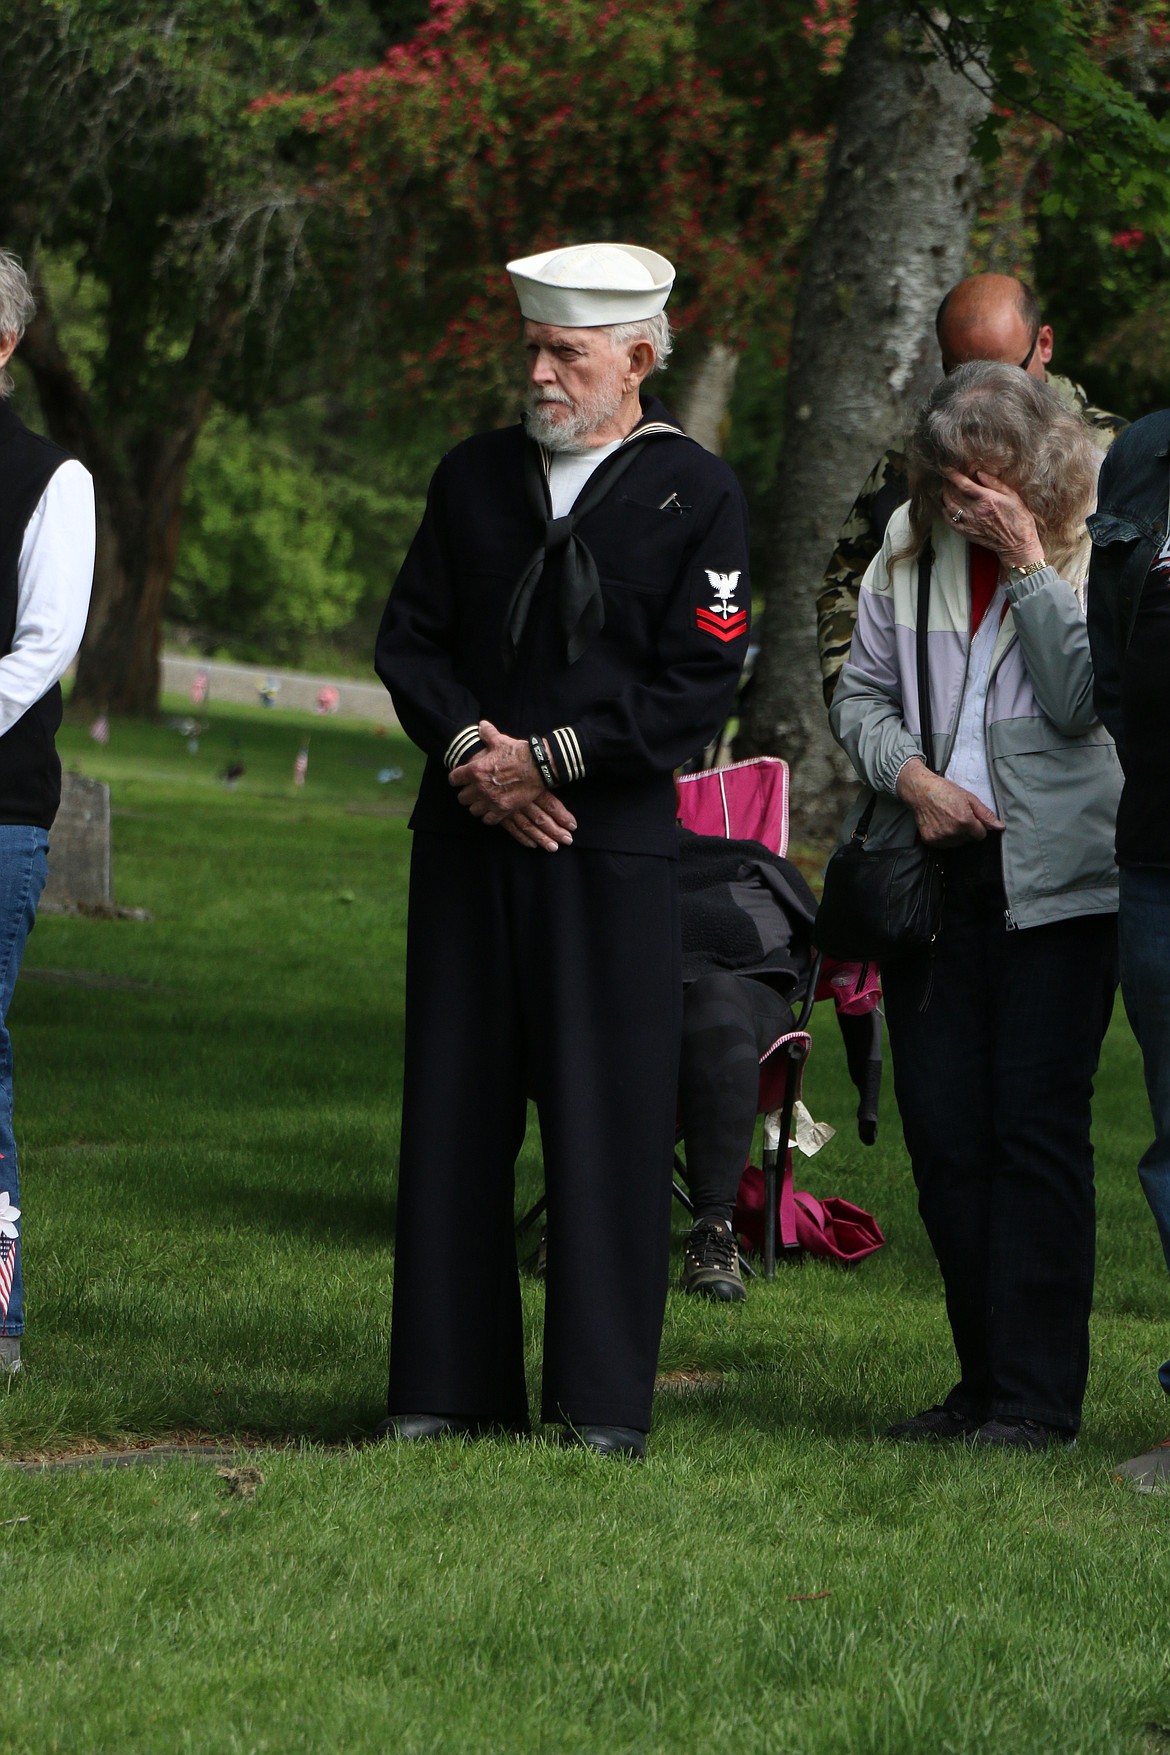 Thomas Spade, wearing his uniform from when he served in the U.S. Navy, attends Monday's Memorial Day ceremony at Pinecrest Cemetery.